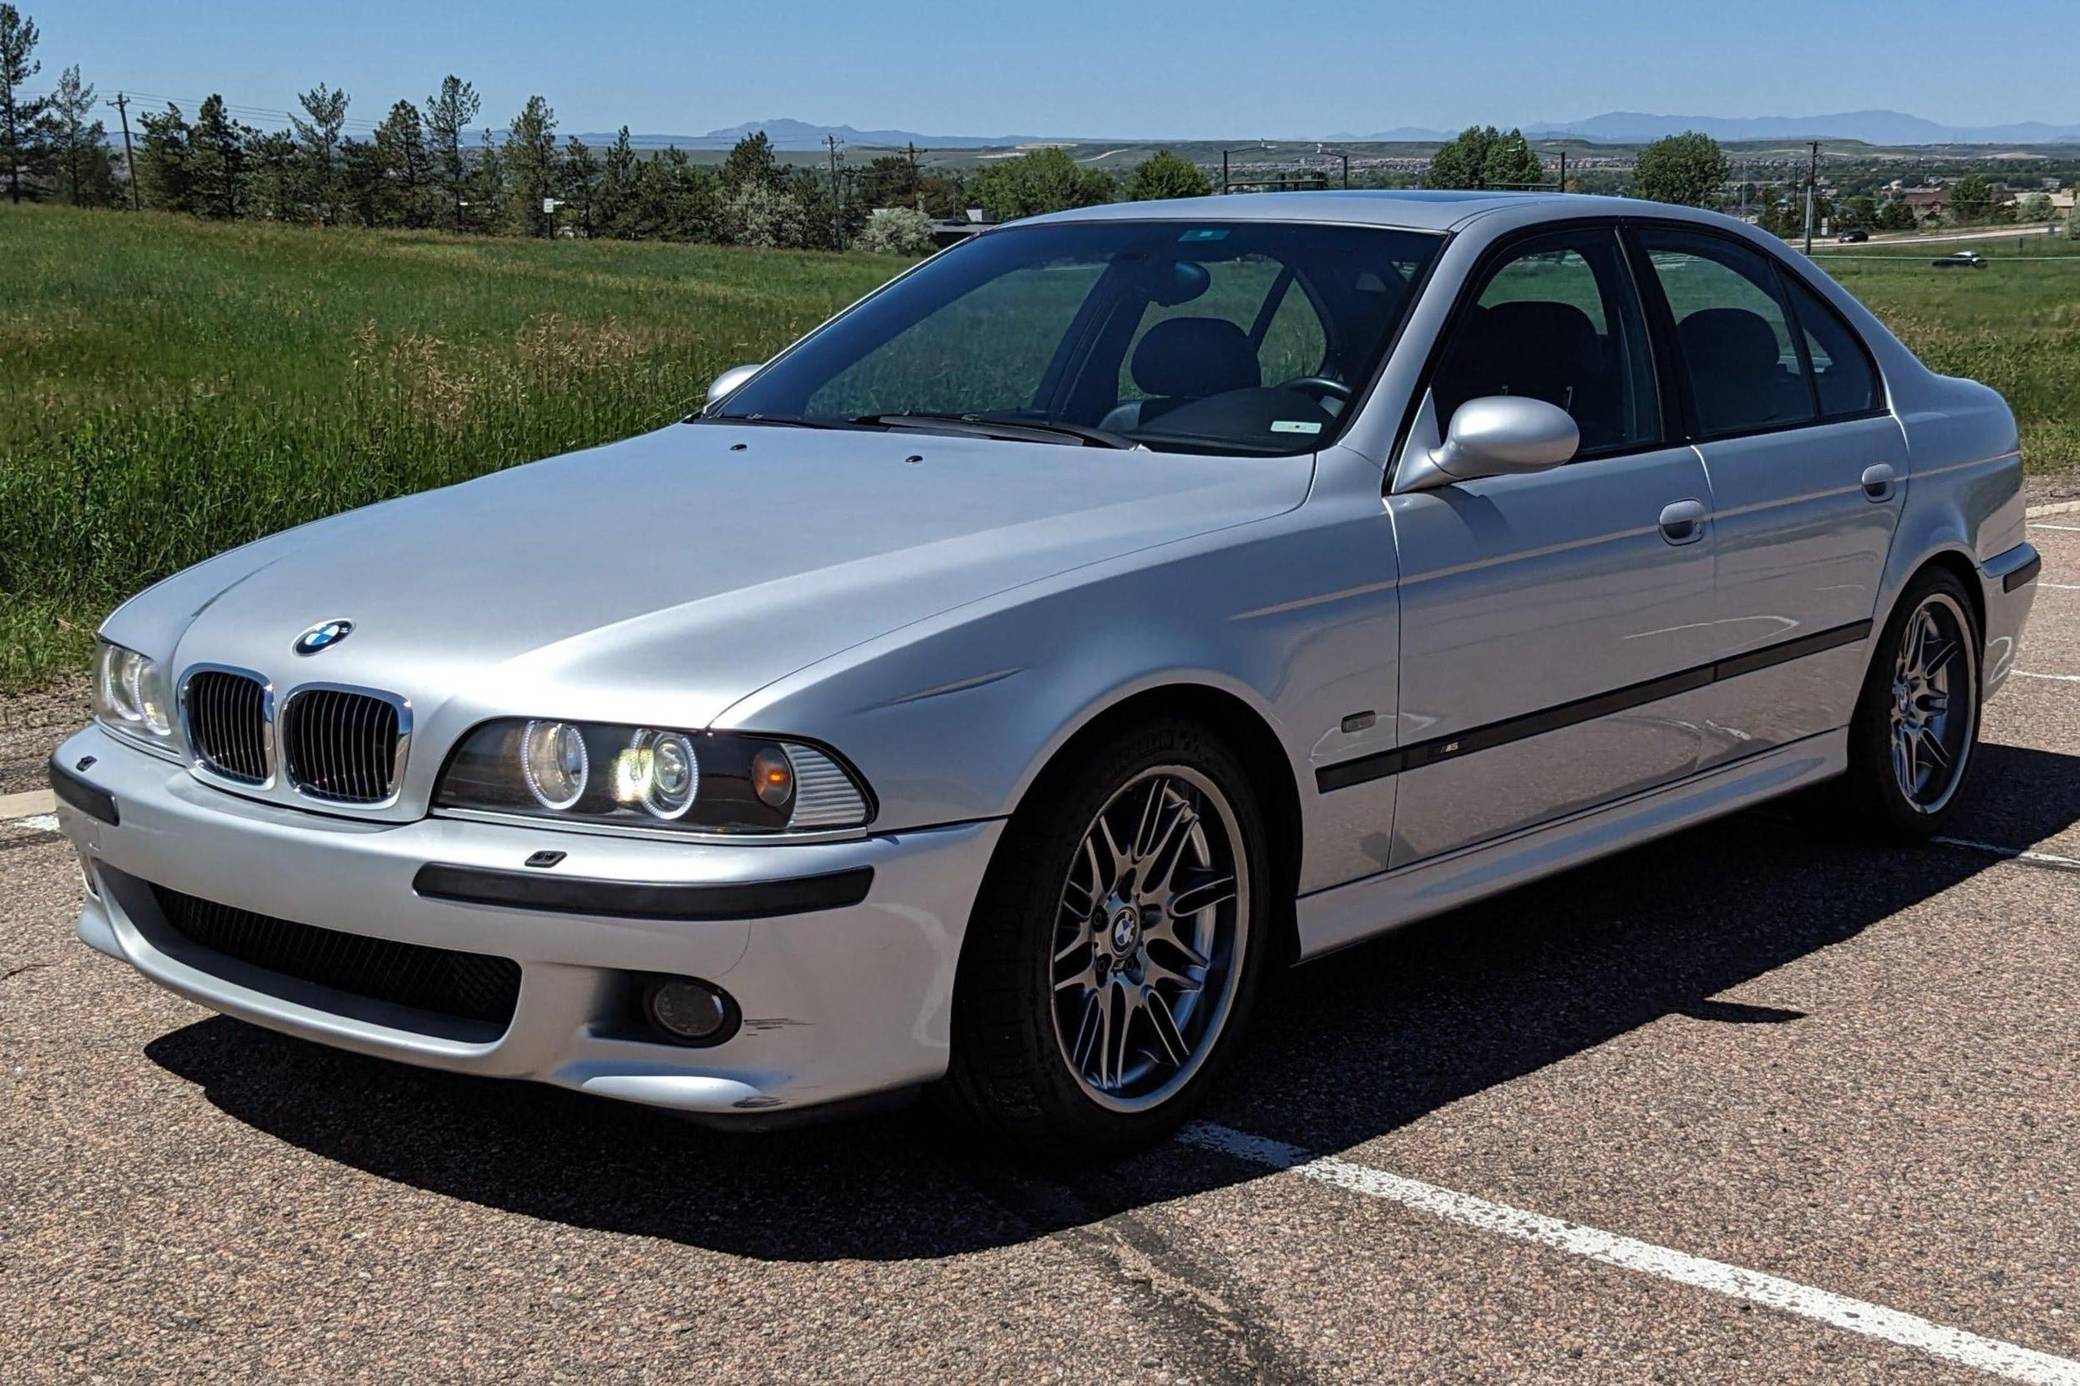 At $22,000, Will This 2000 BMW M5 Prove To Be A Deal?